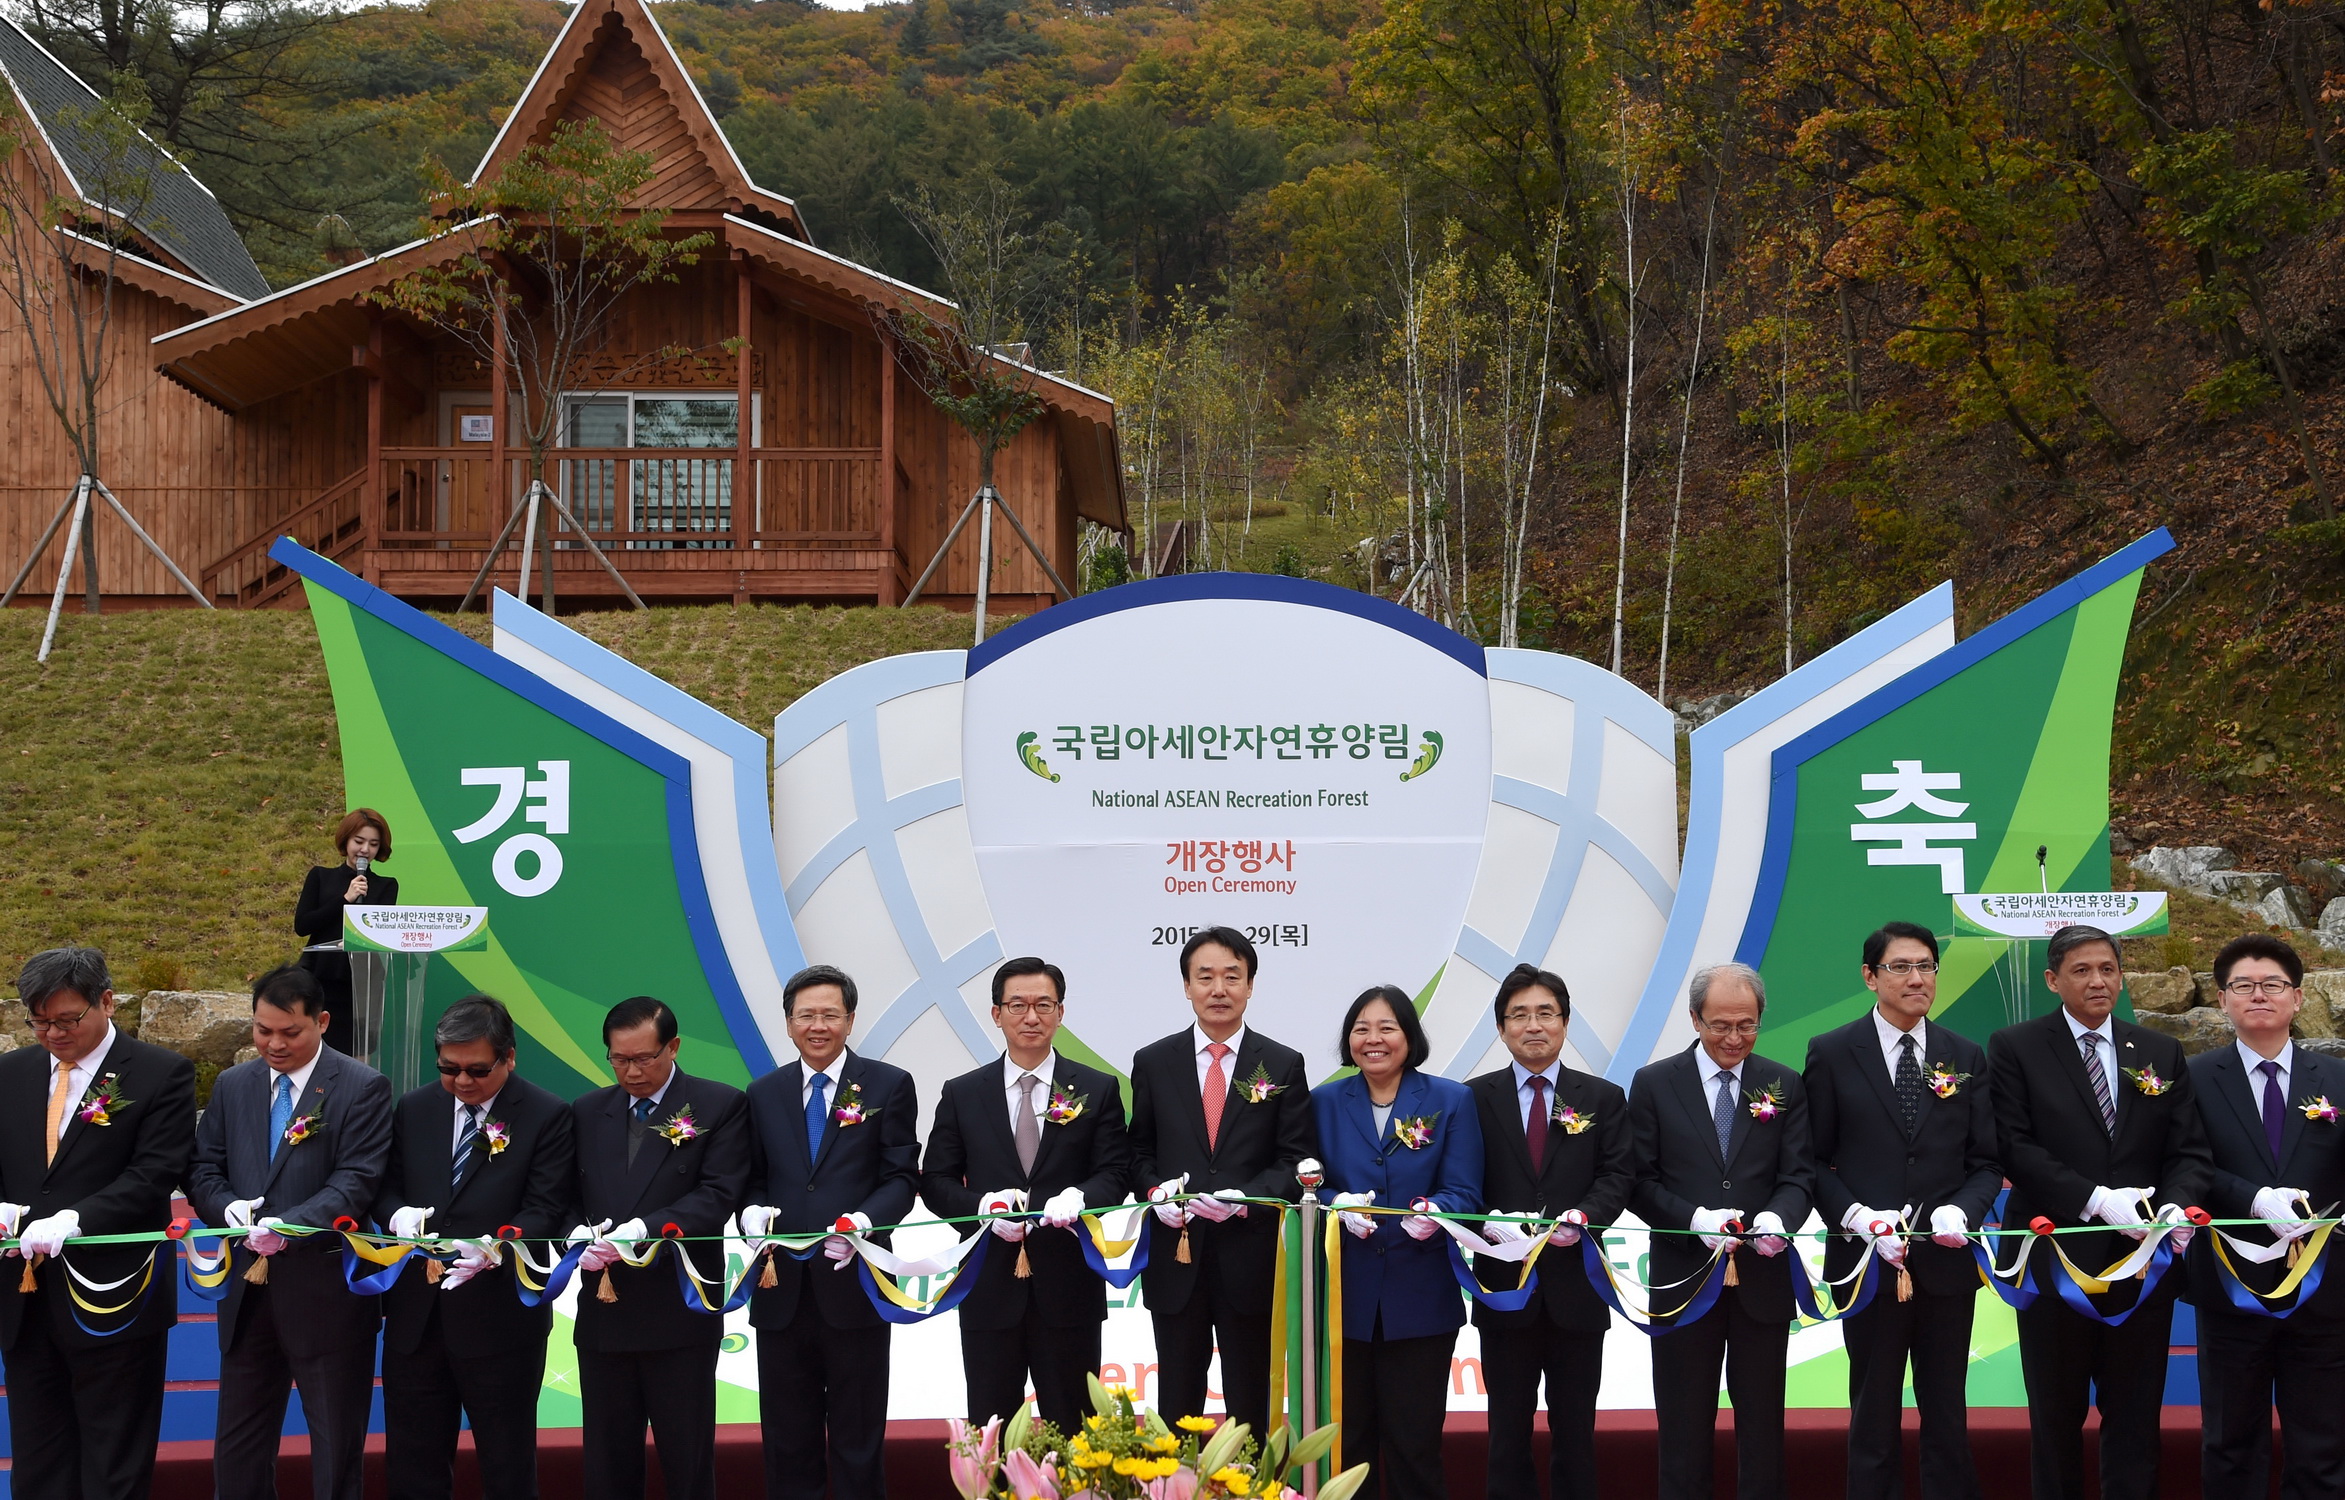 ASEAN Recreation Forest opens in November 이미지1